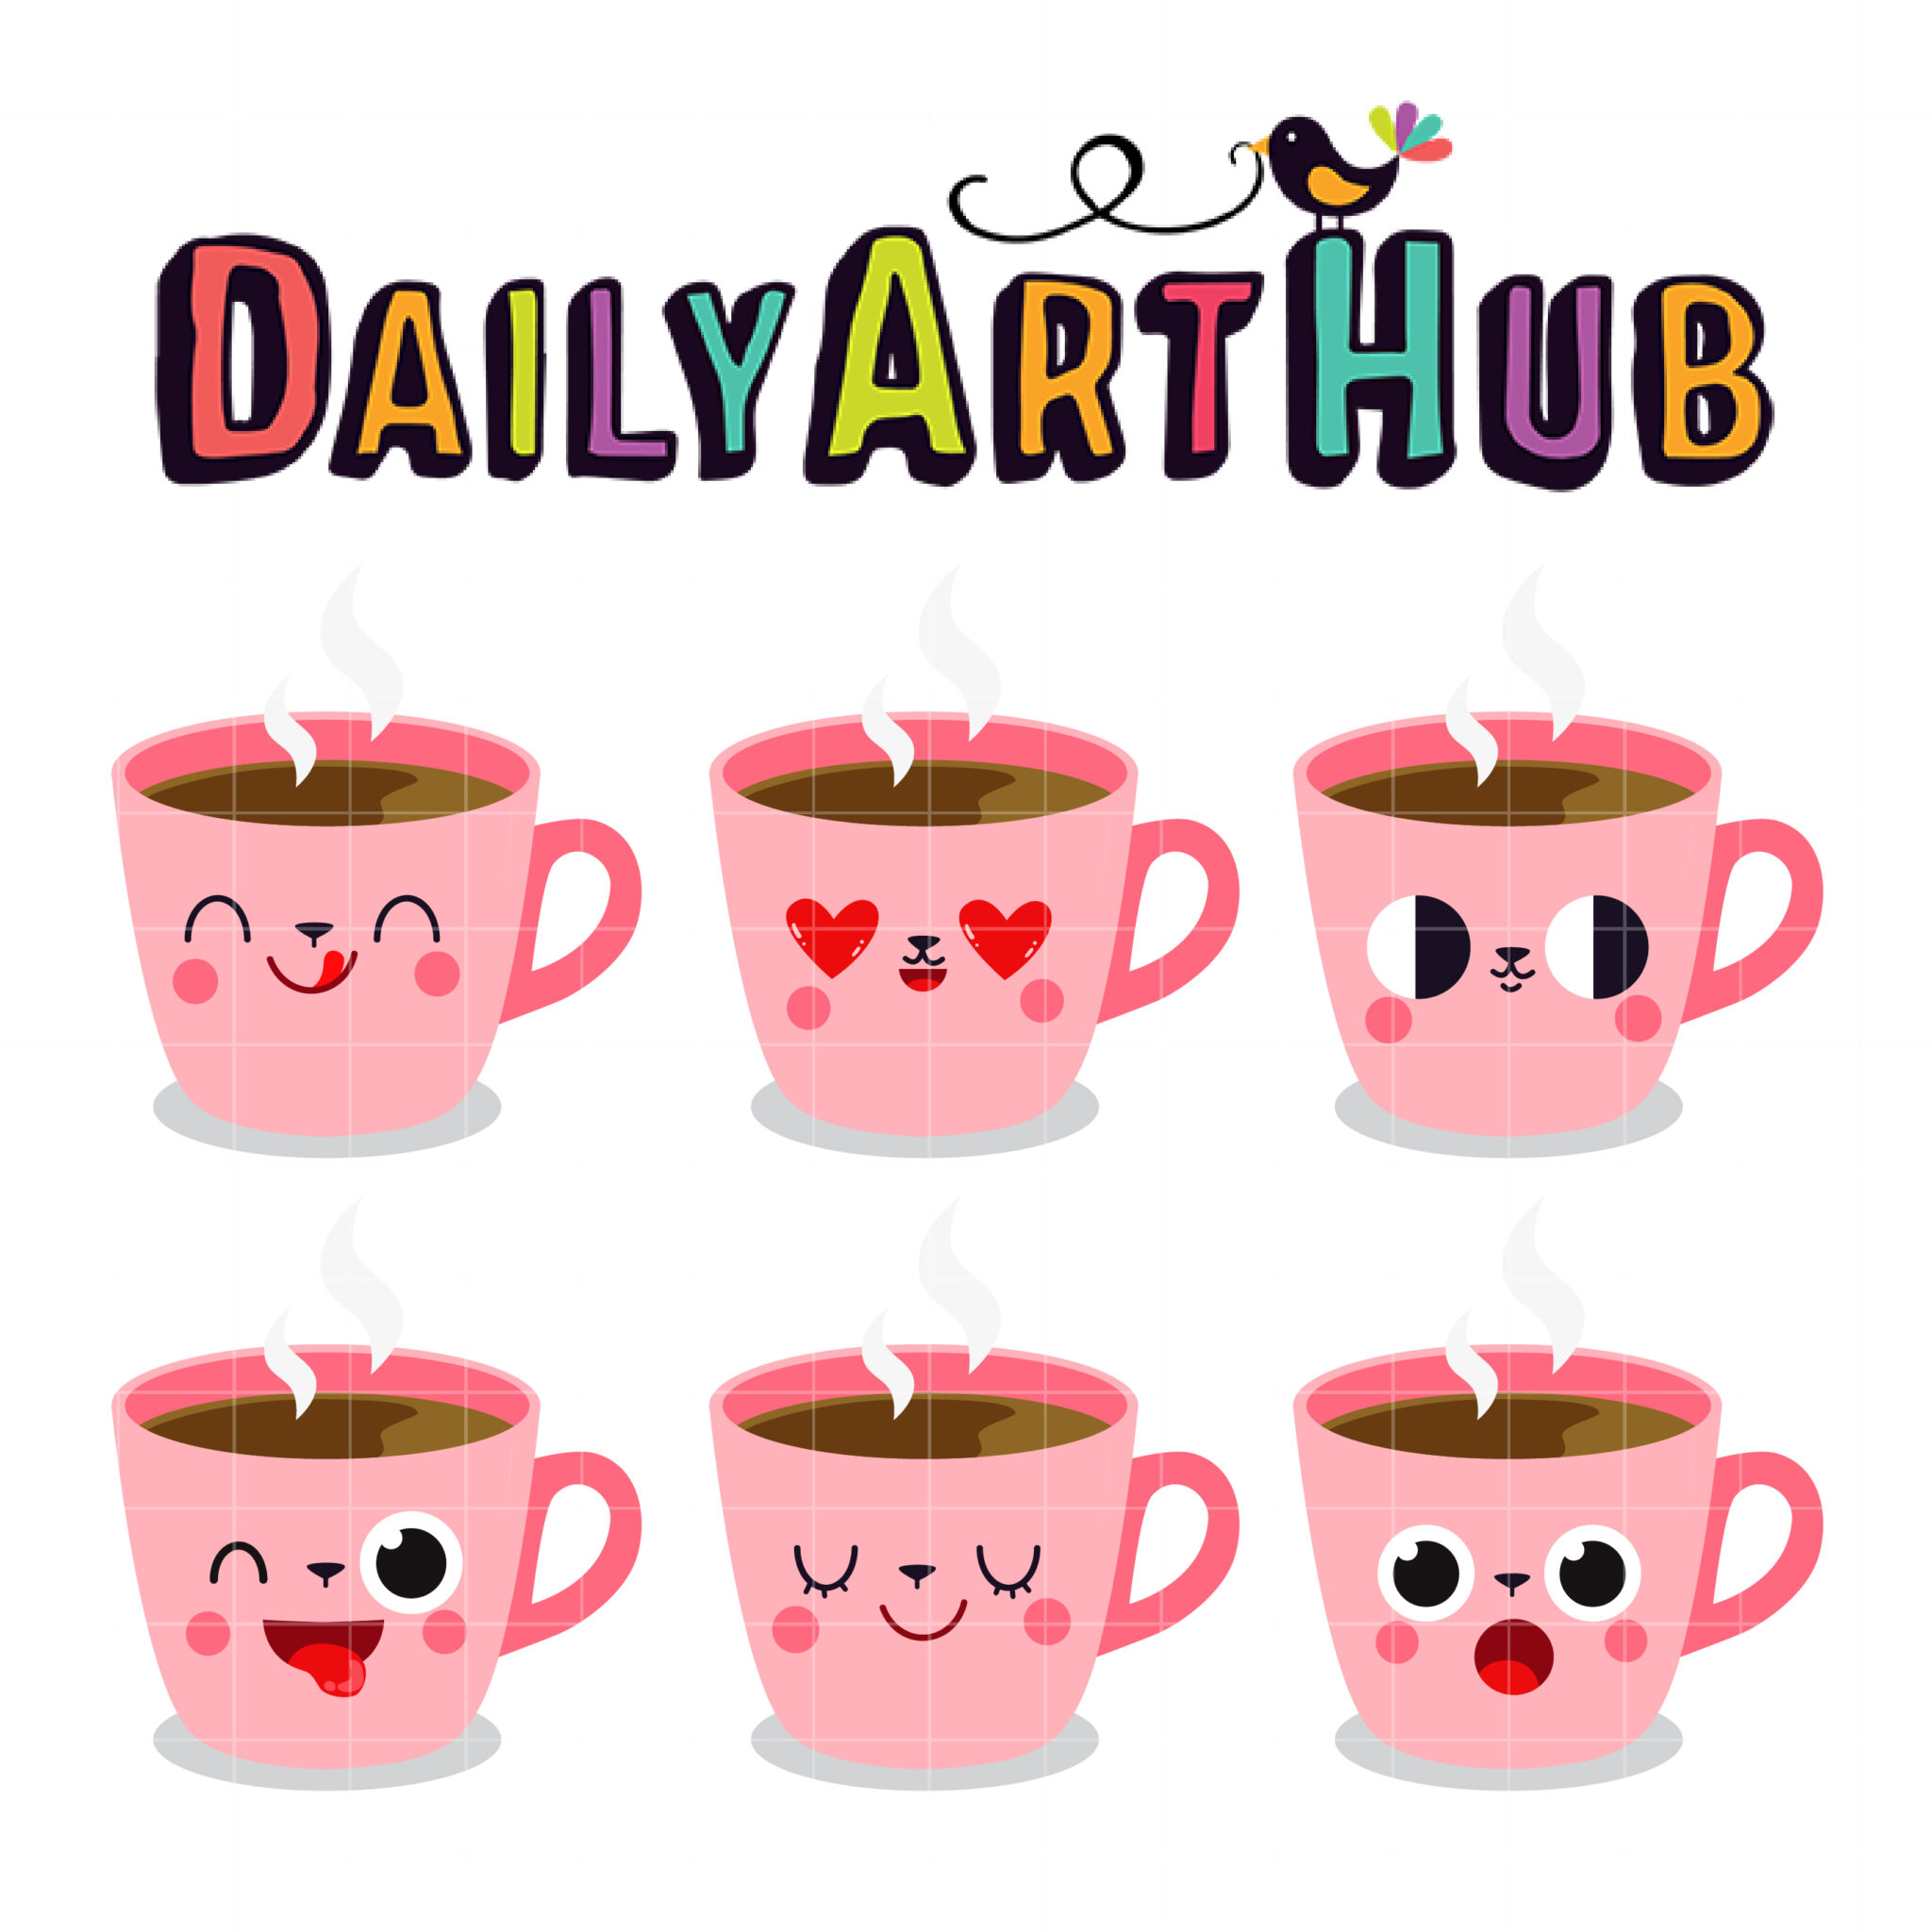 https://www.dailyarthub.com/wp-content/uploads/2022/02/Cute-Coffee-Cup-Expressions-scaled.jpg